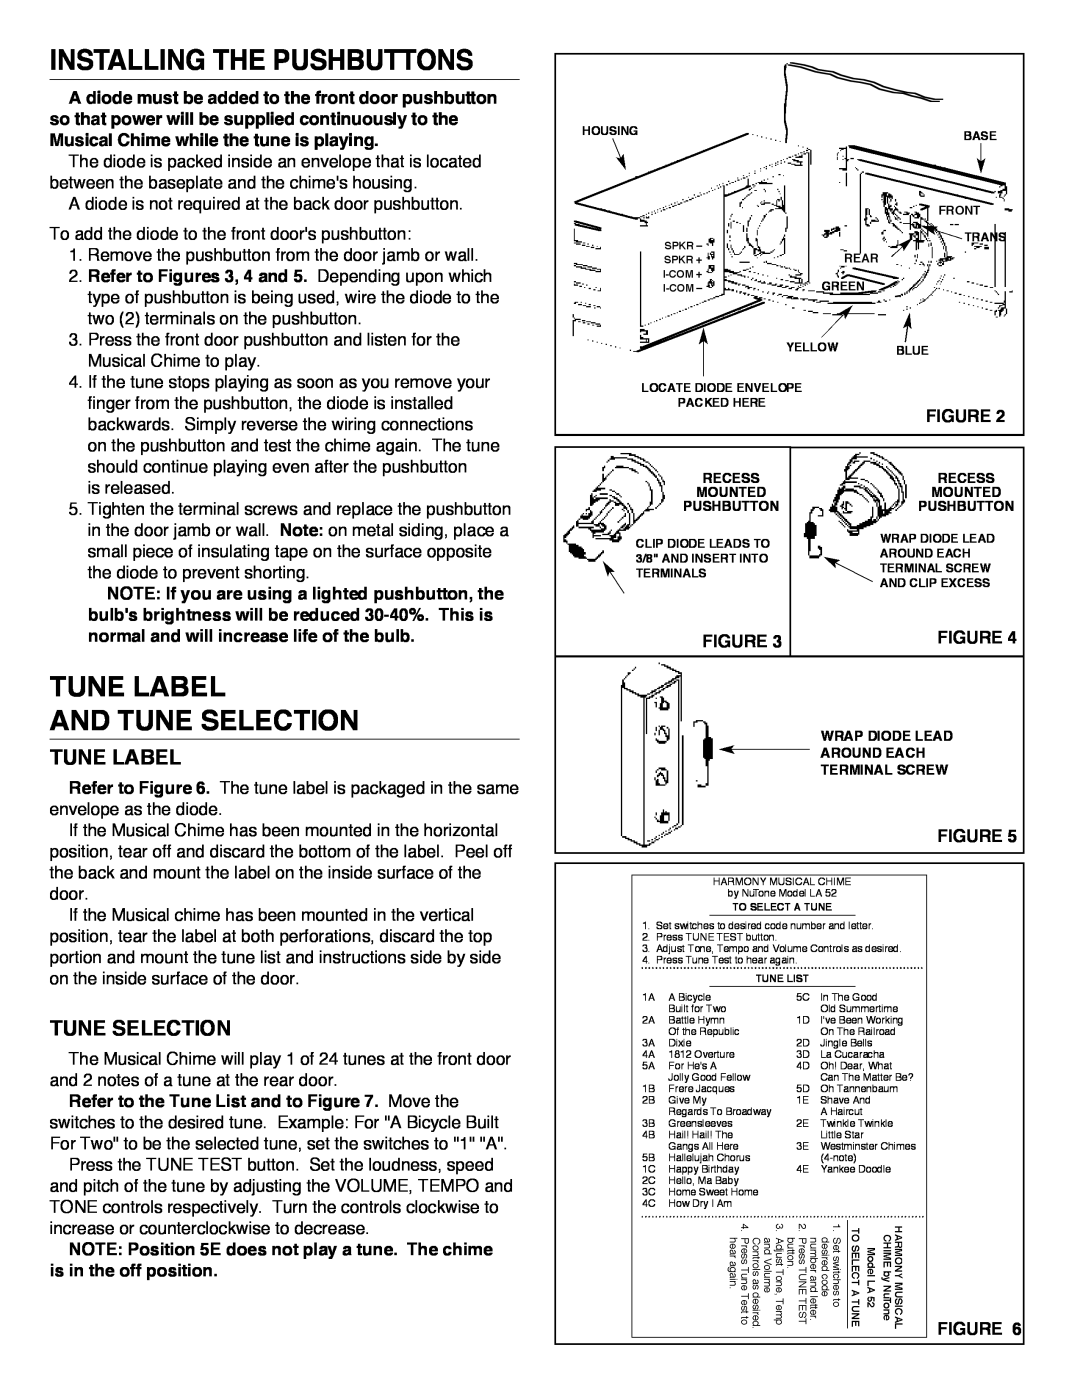 NuTone LA-52 Series installation instructions Installing The Pushbuttons, Tune Label And Tune Selection 